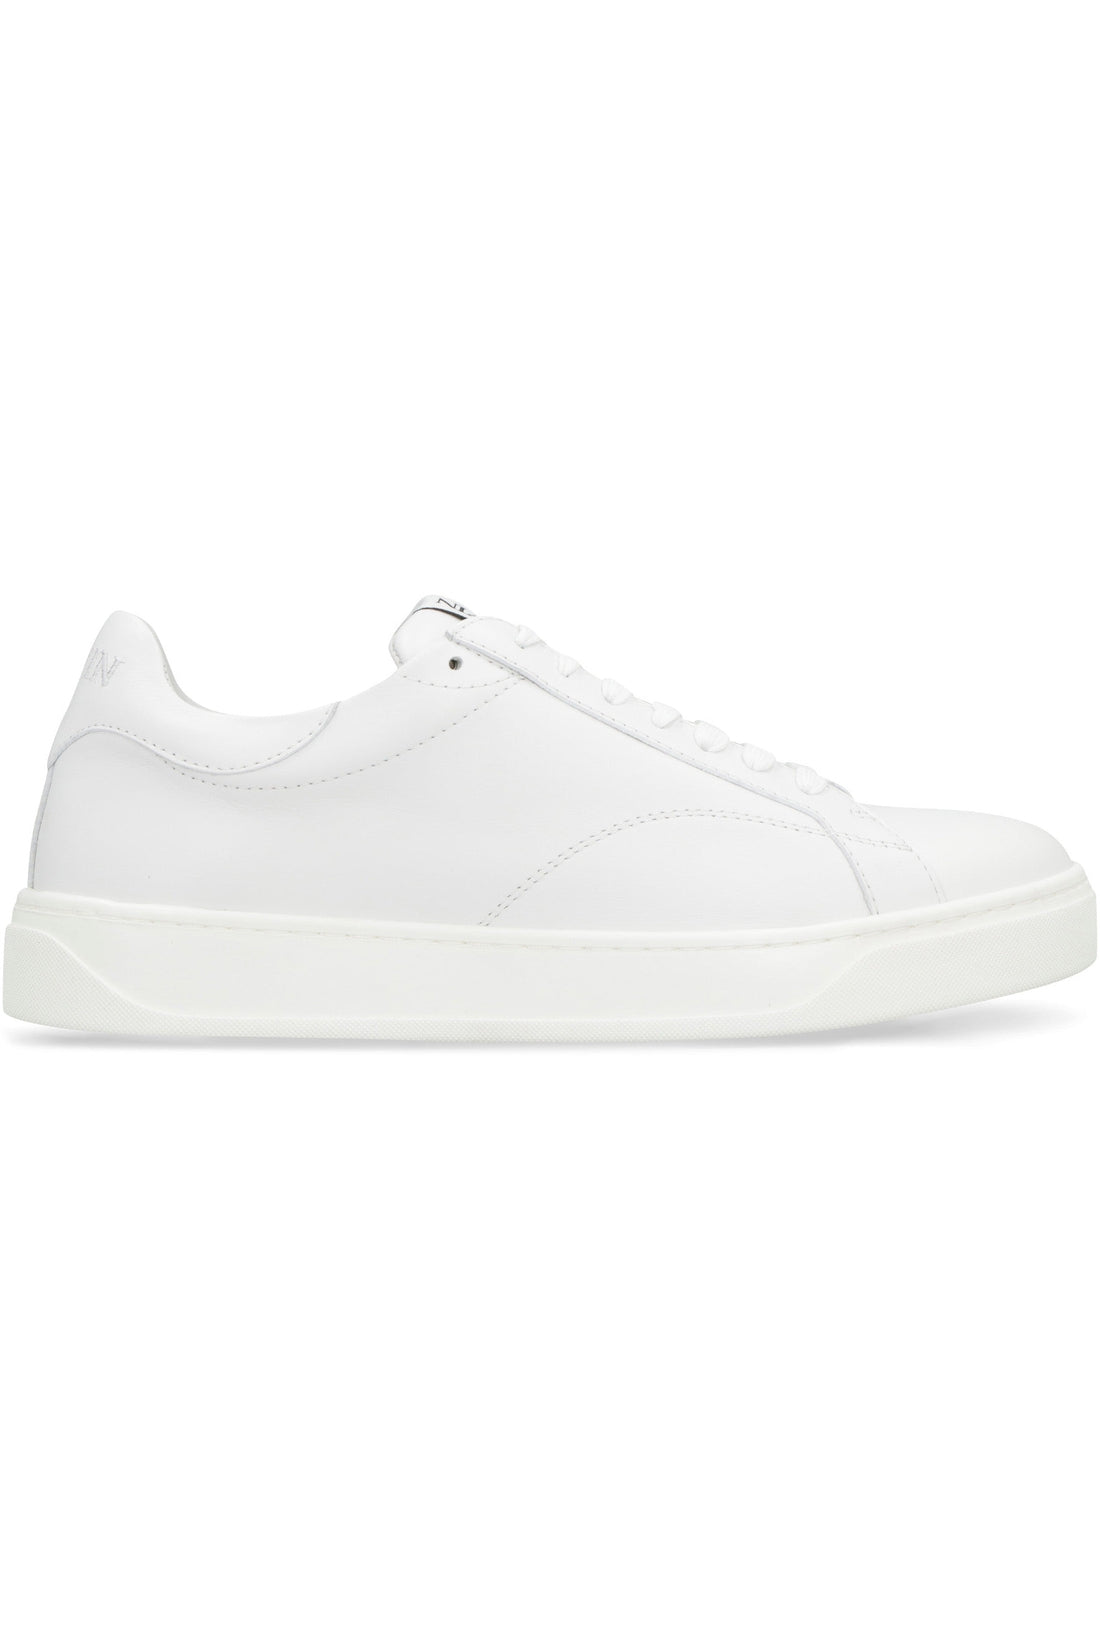 Lanvin-OUTLET-SALE-DDB0 leather low-top sneakers-ARCHIVIST